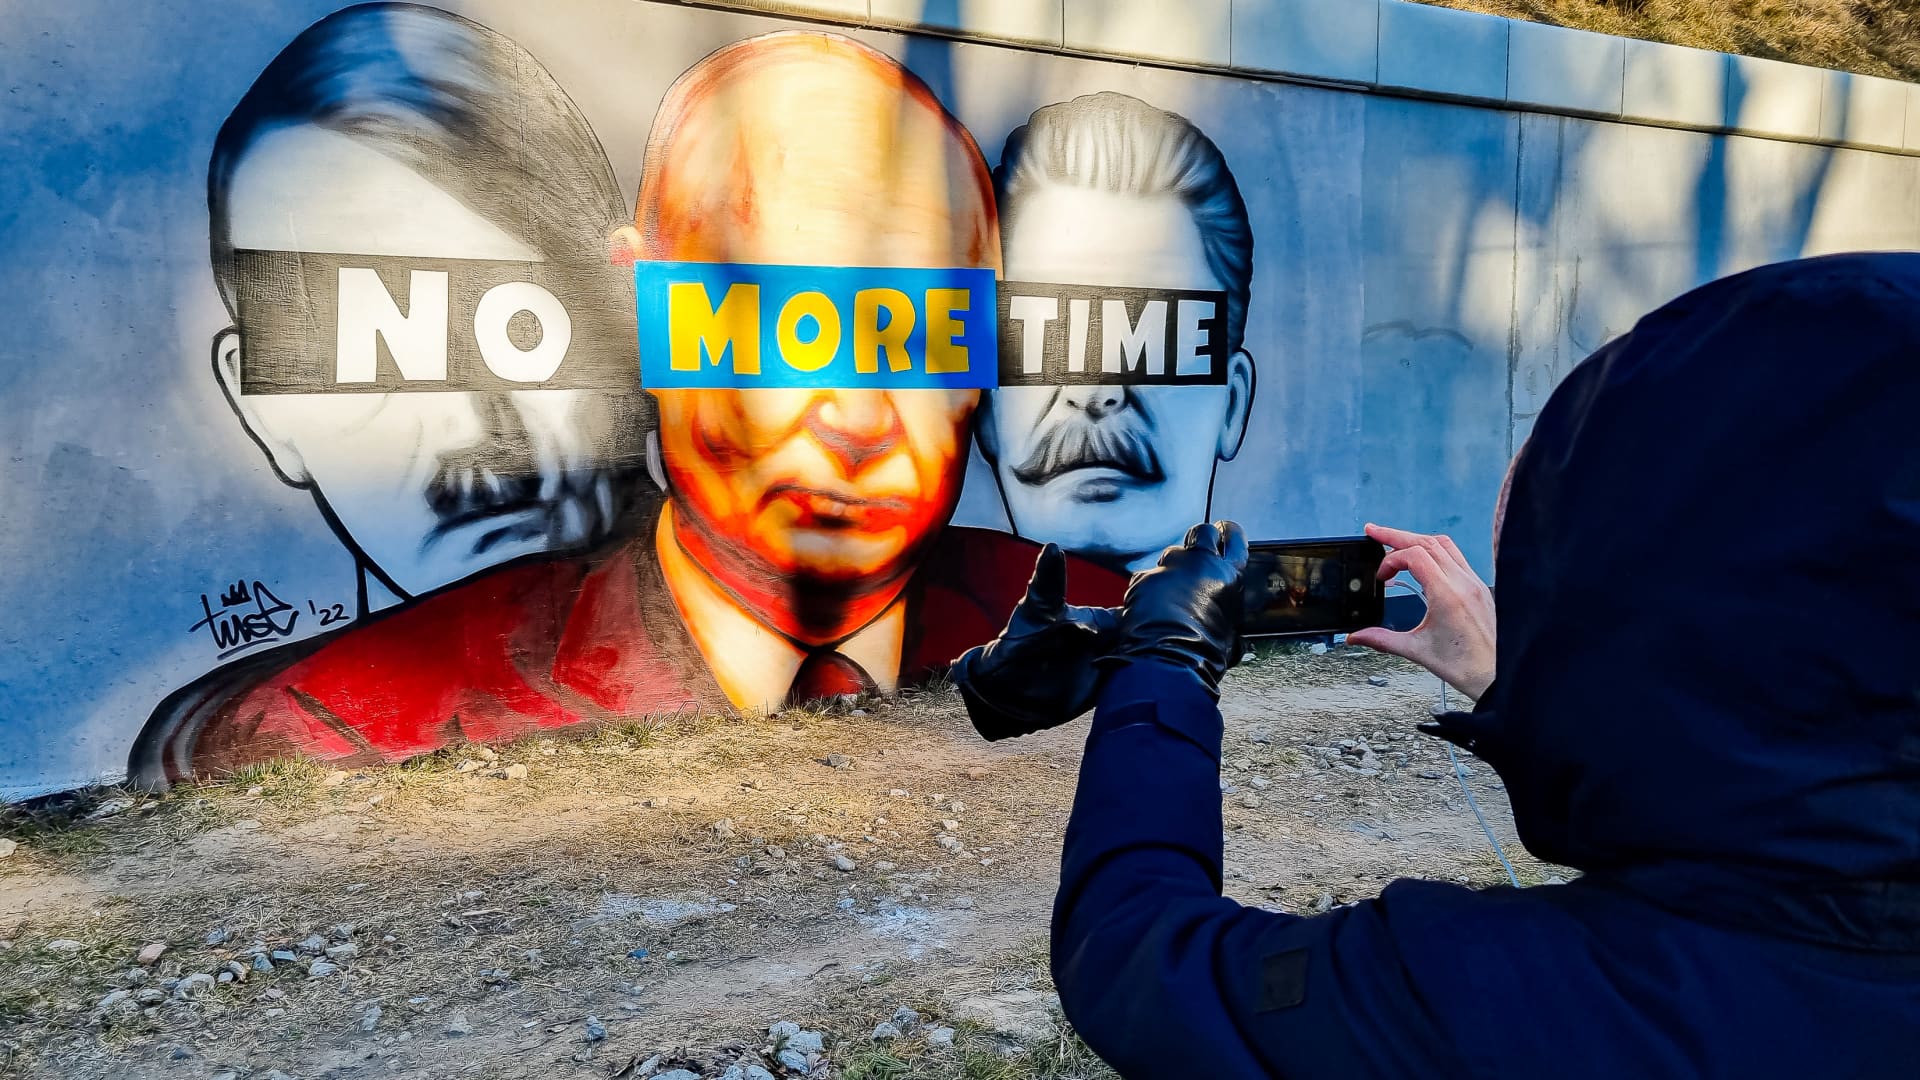 A mural of Putin, Hitler, and Stalin with a slogan 